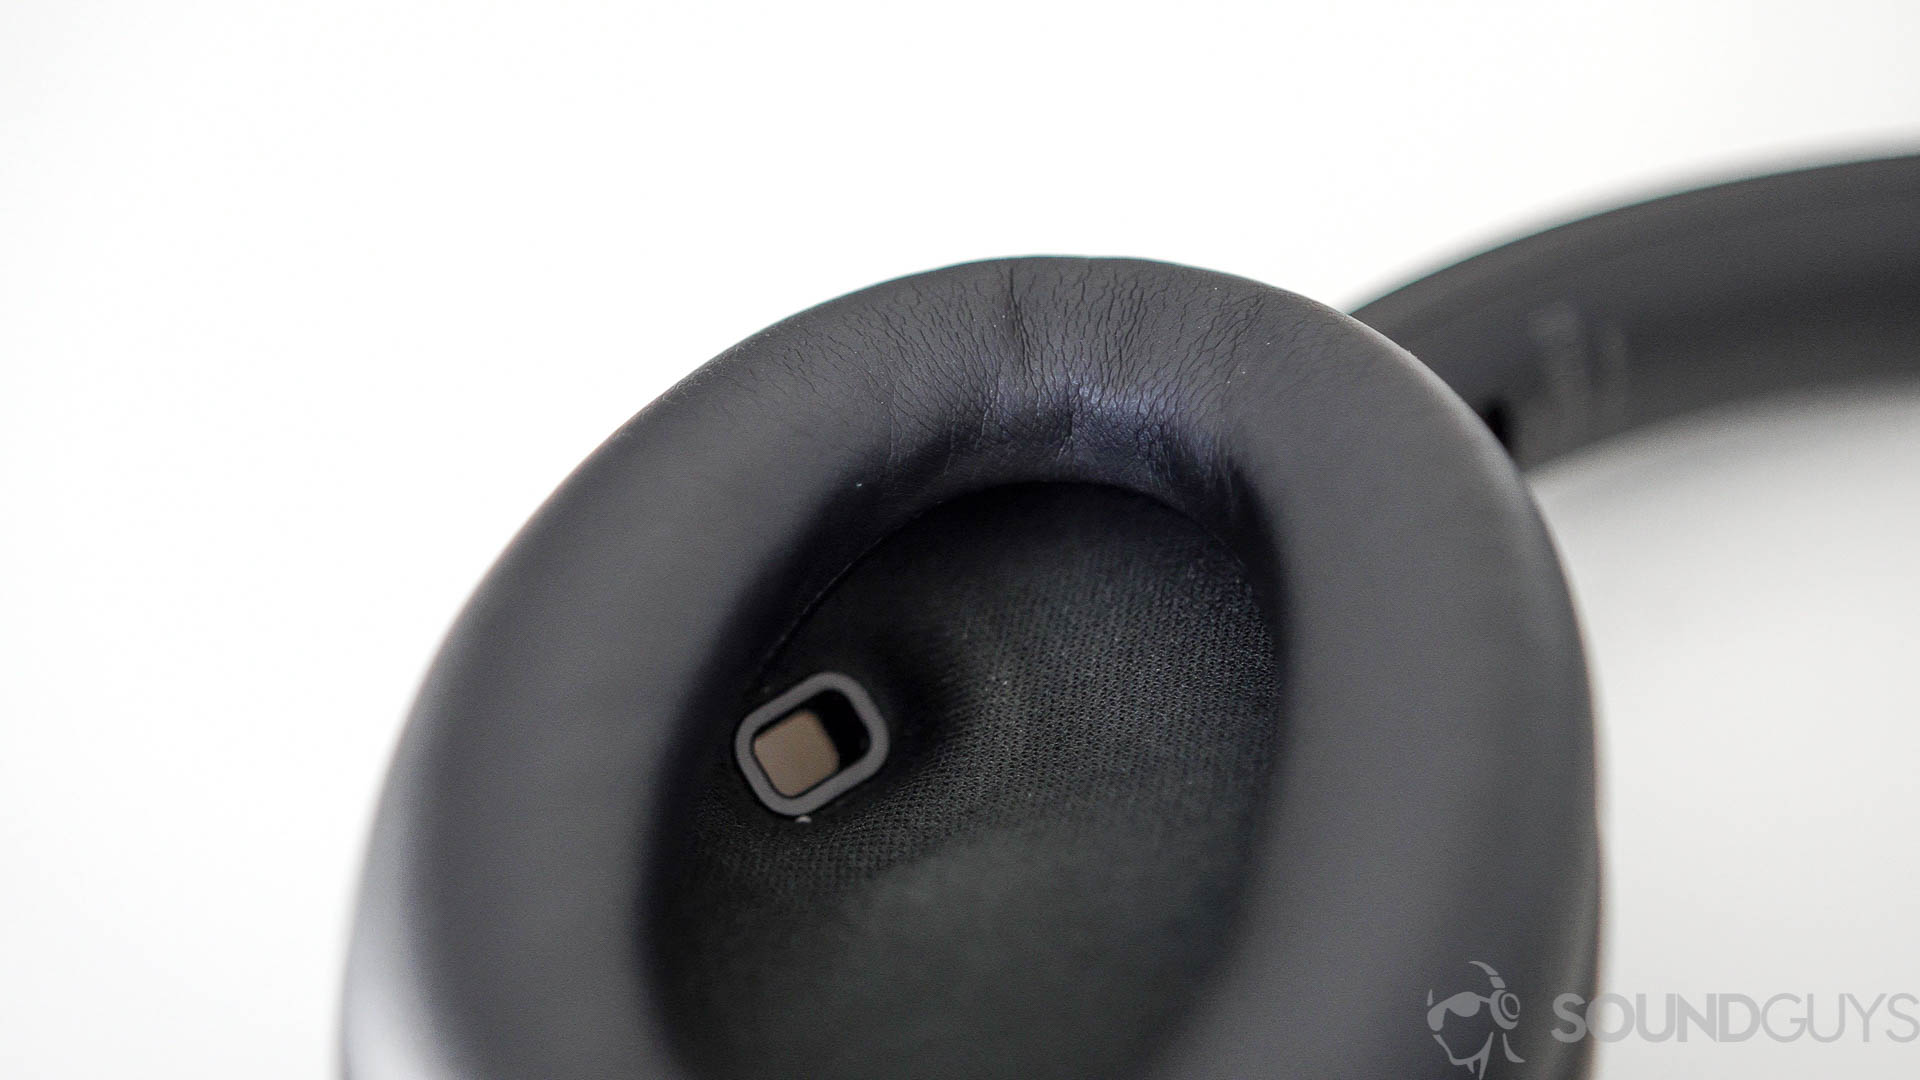 Close-up photo of the proximity sensor on the inside of the left earcup of the Sony WH-1000XM4 headphones.